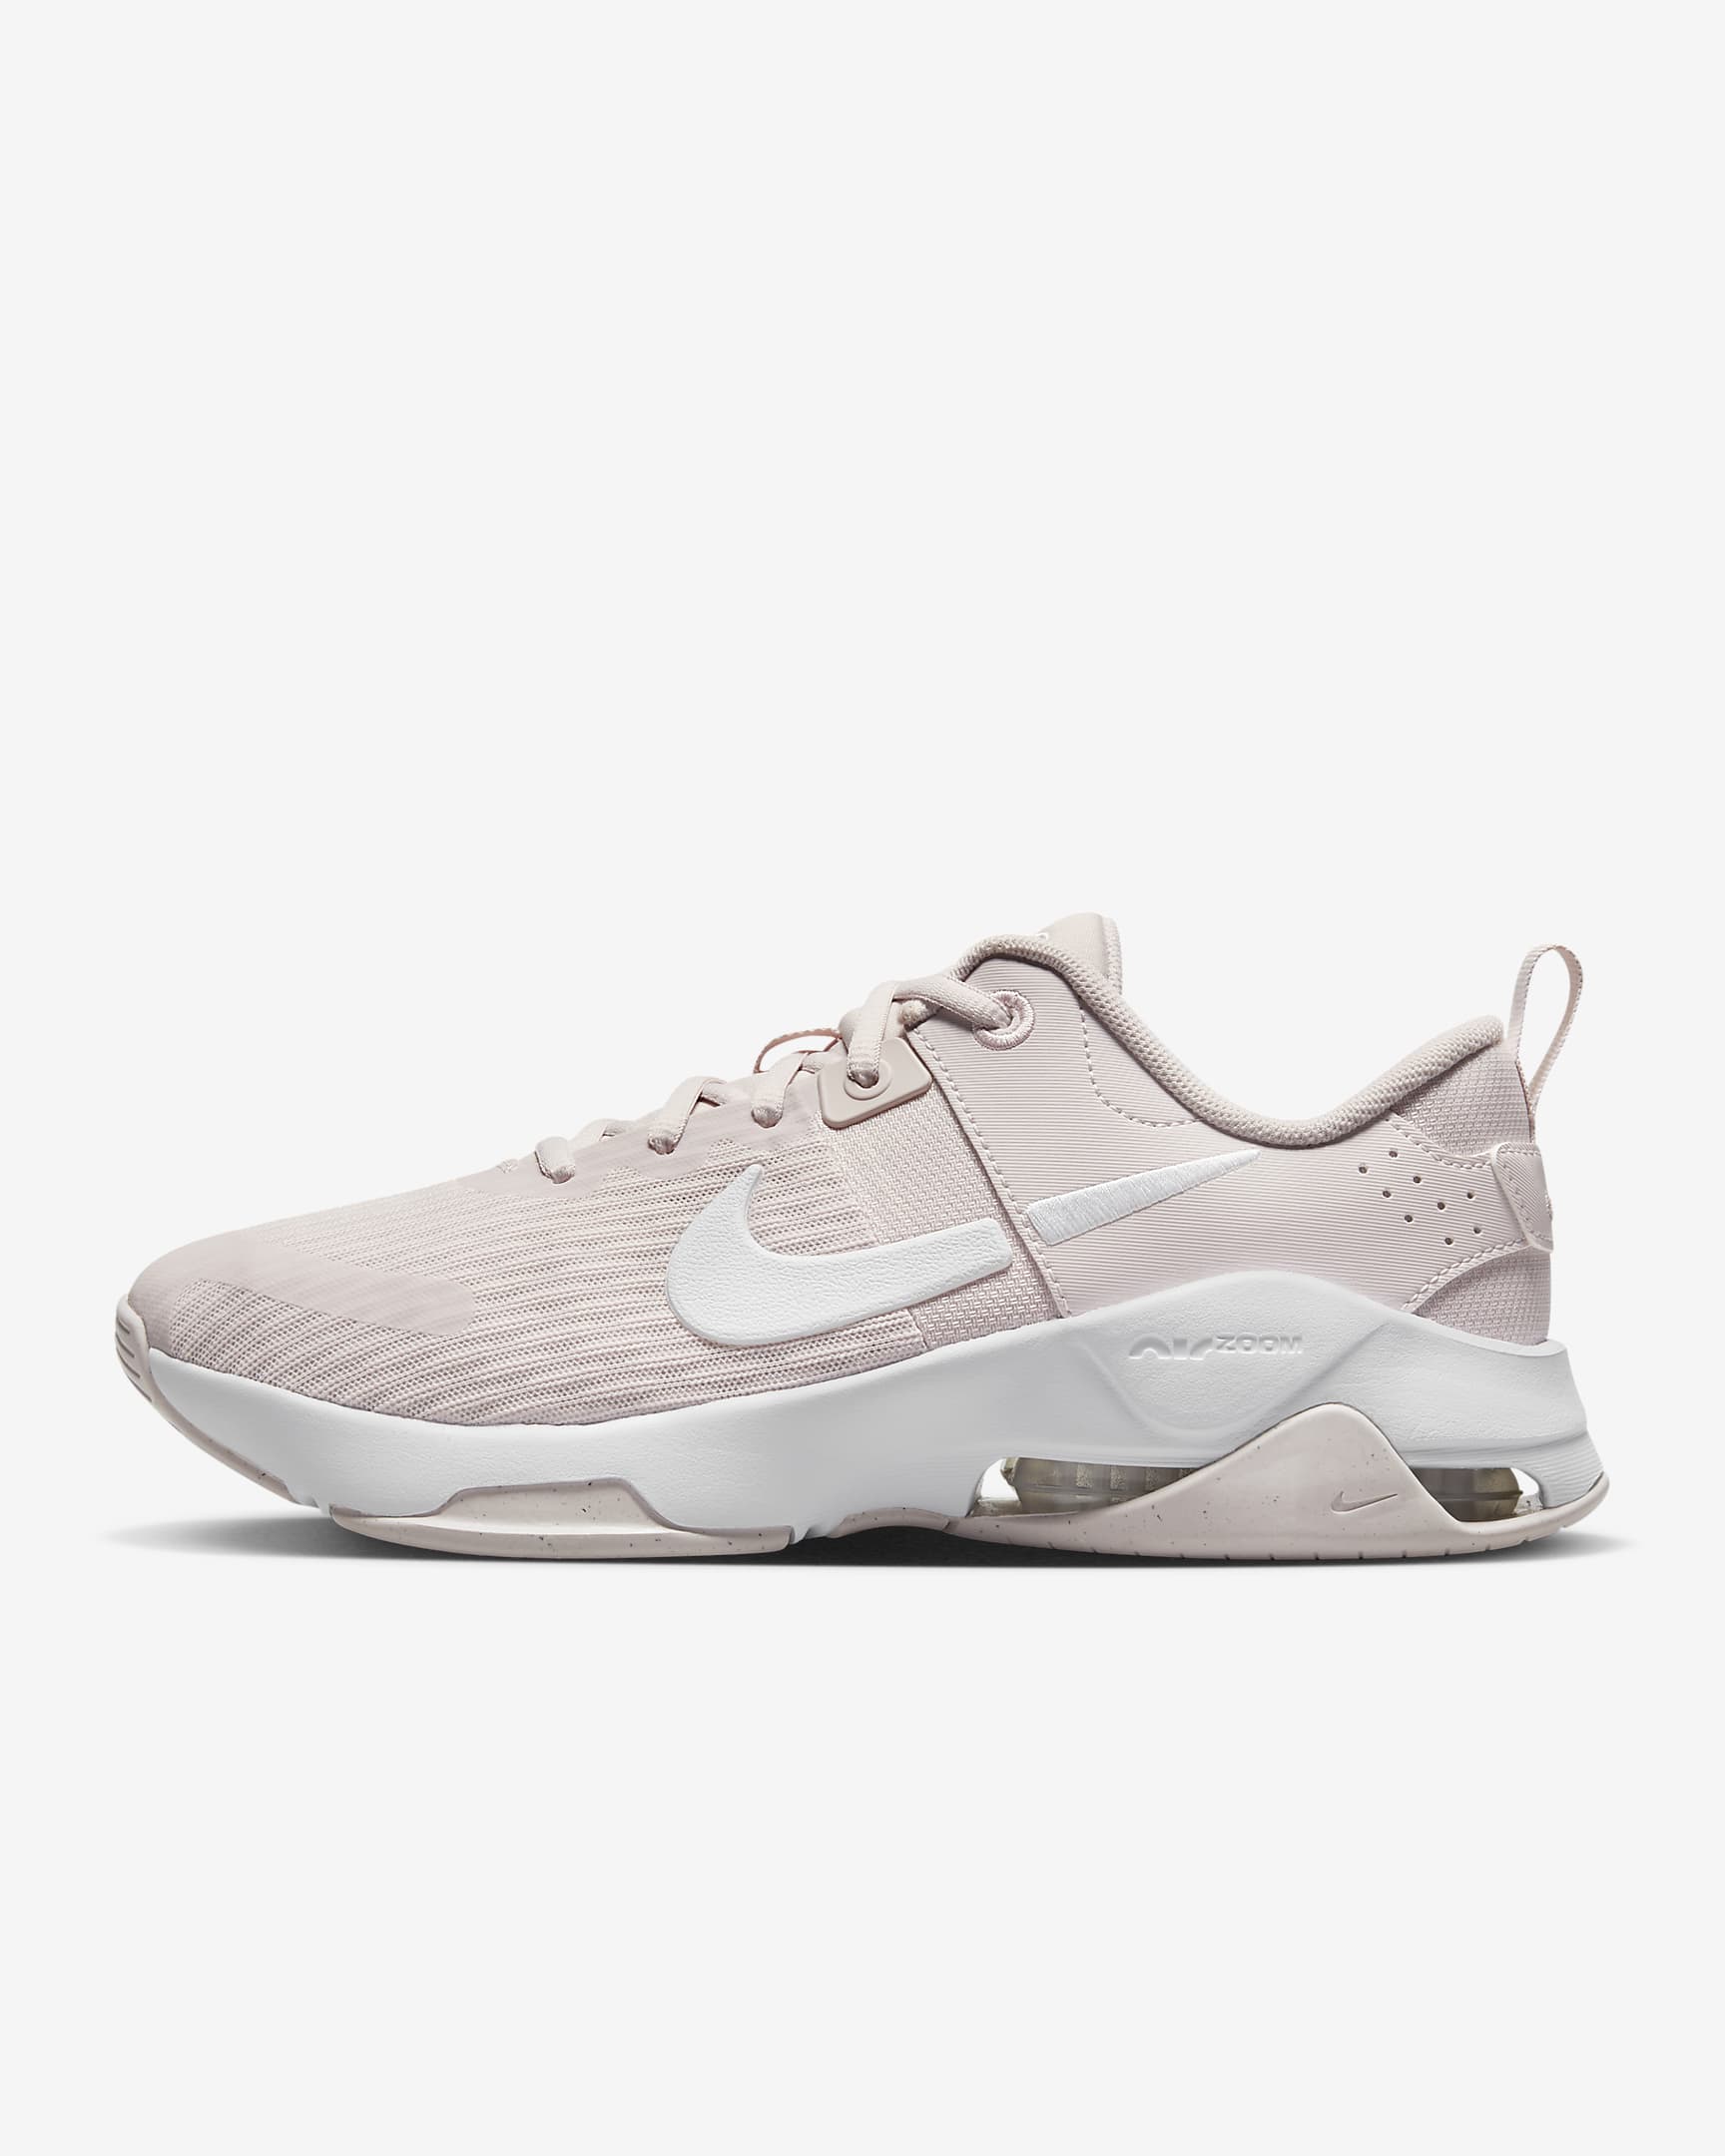 Nike Zoom Bella 6 Women's Workout Shoes - Barely Rose/Diffused Taupe/Metallic Platinum/White